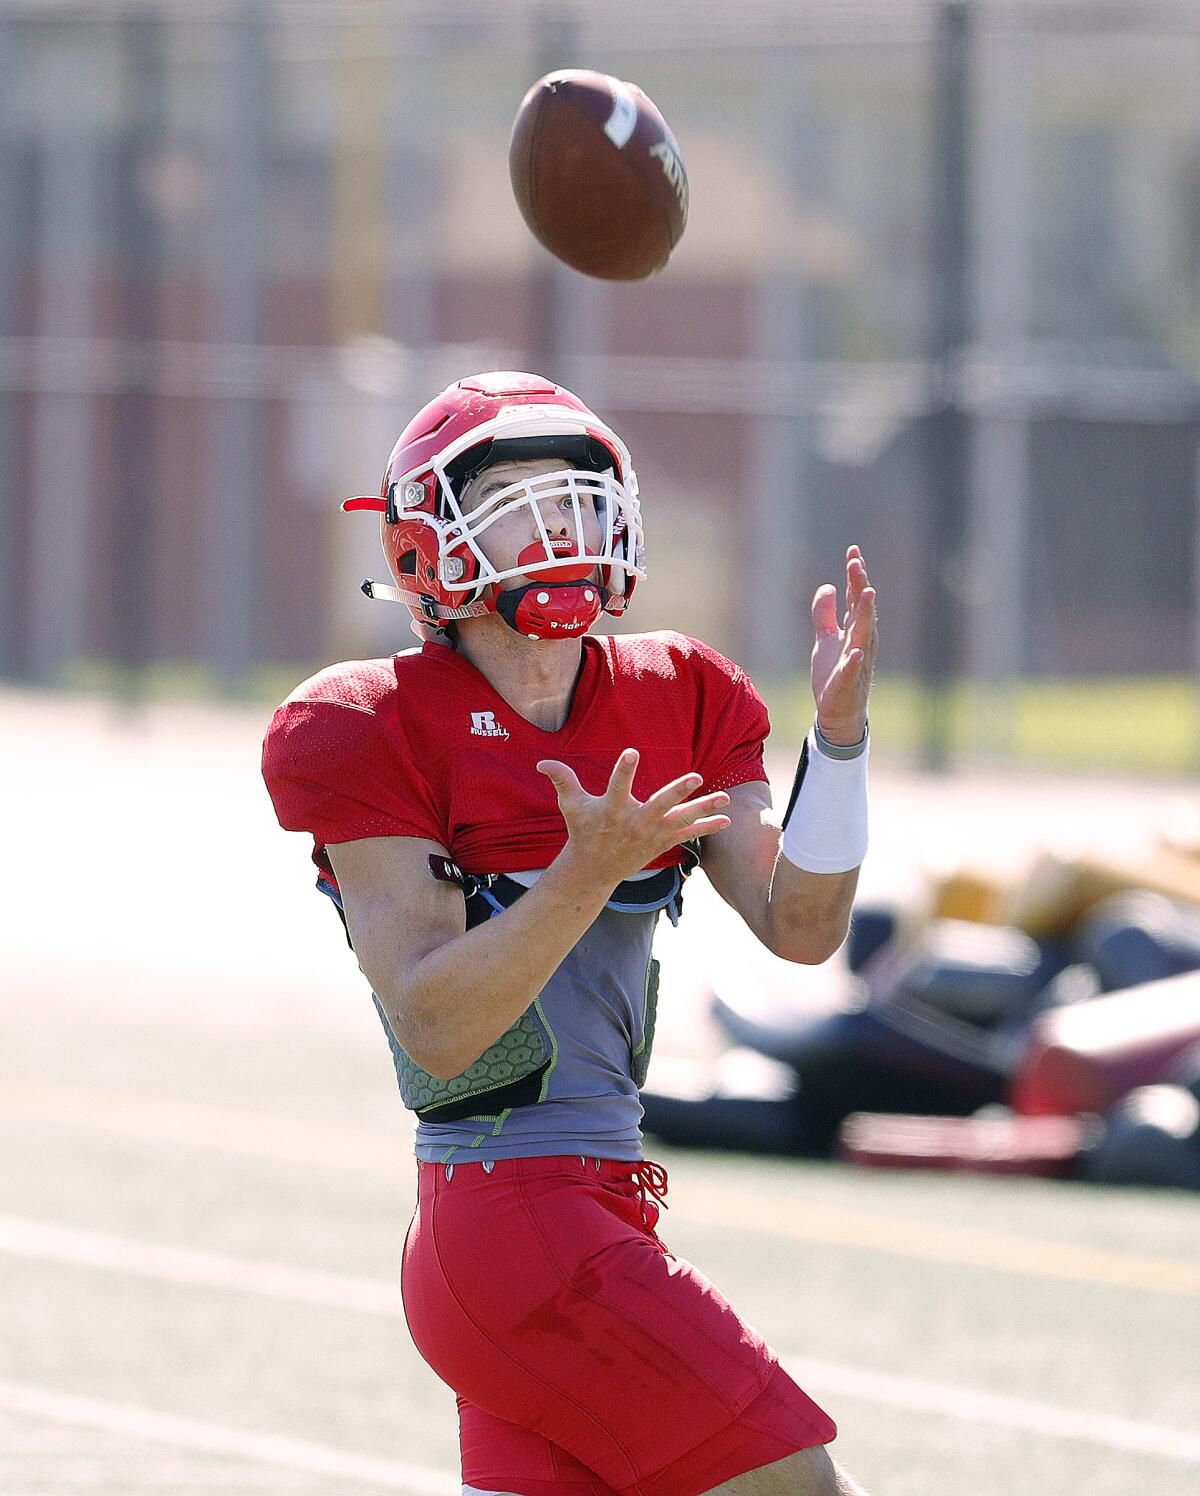 Burroughs' Aiden Forrester waits for the ball to float into his arms during a passing drill at football practice at Burroughs High School in Burbank on Tuesday, August 13, 2019.